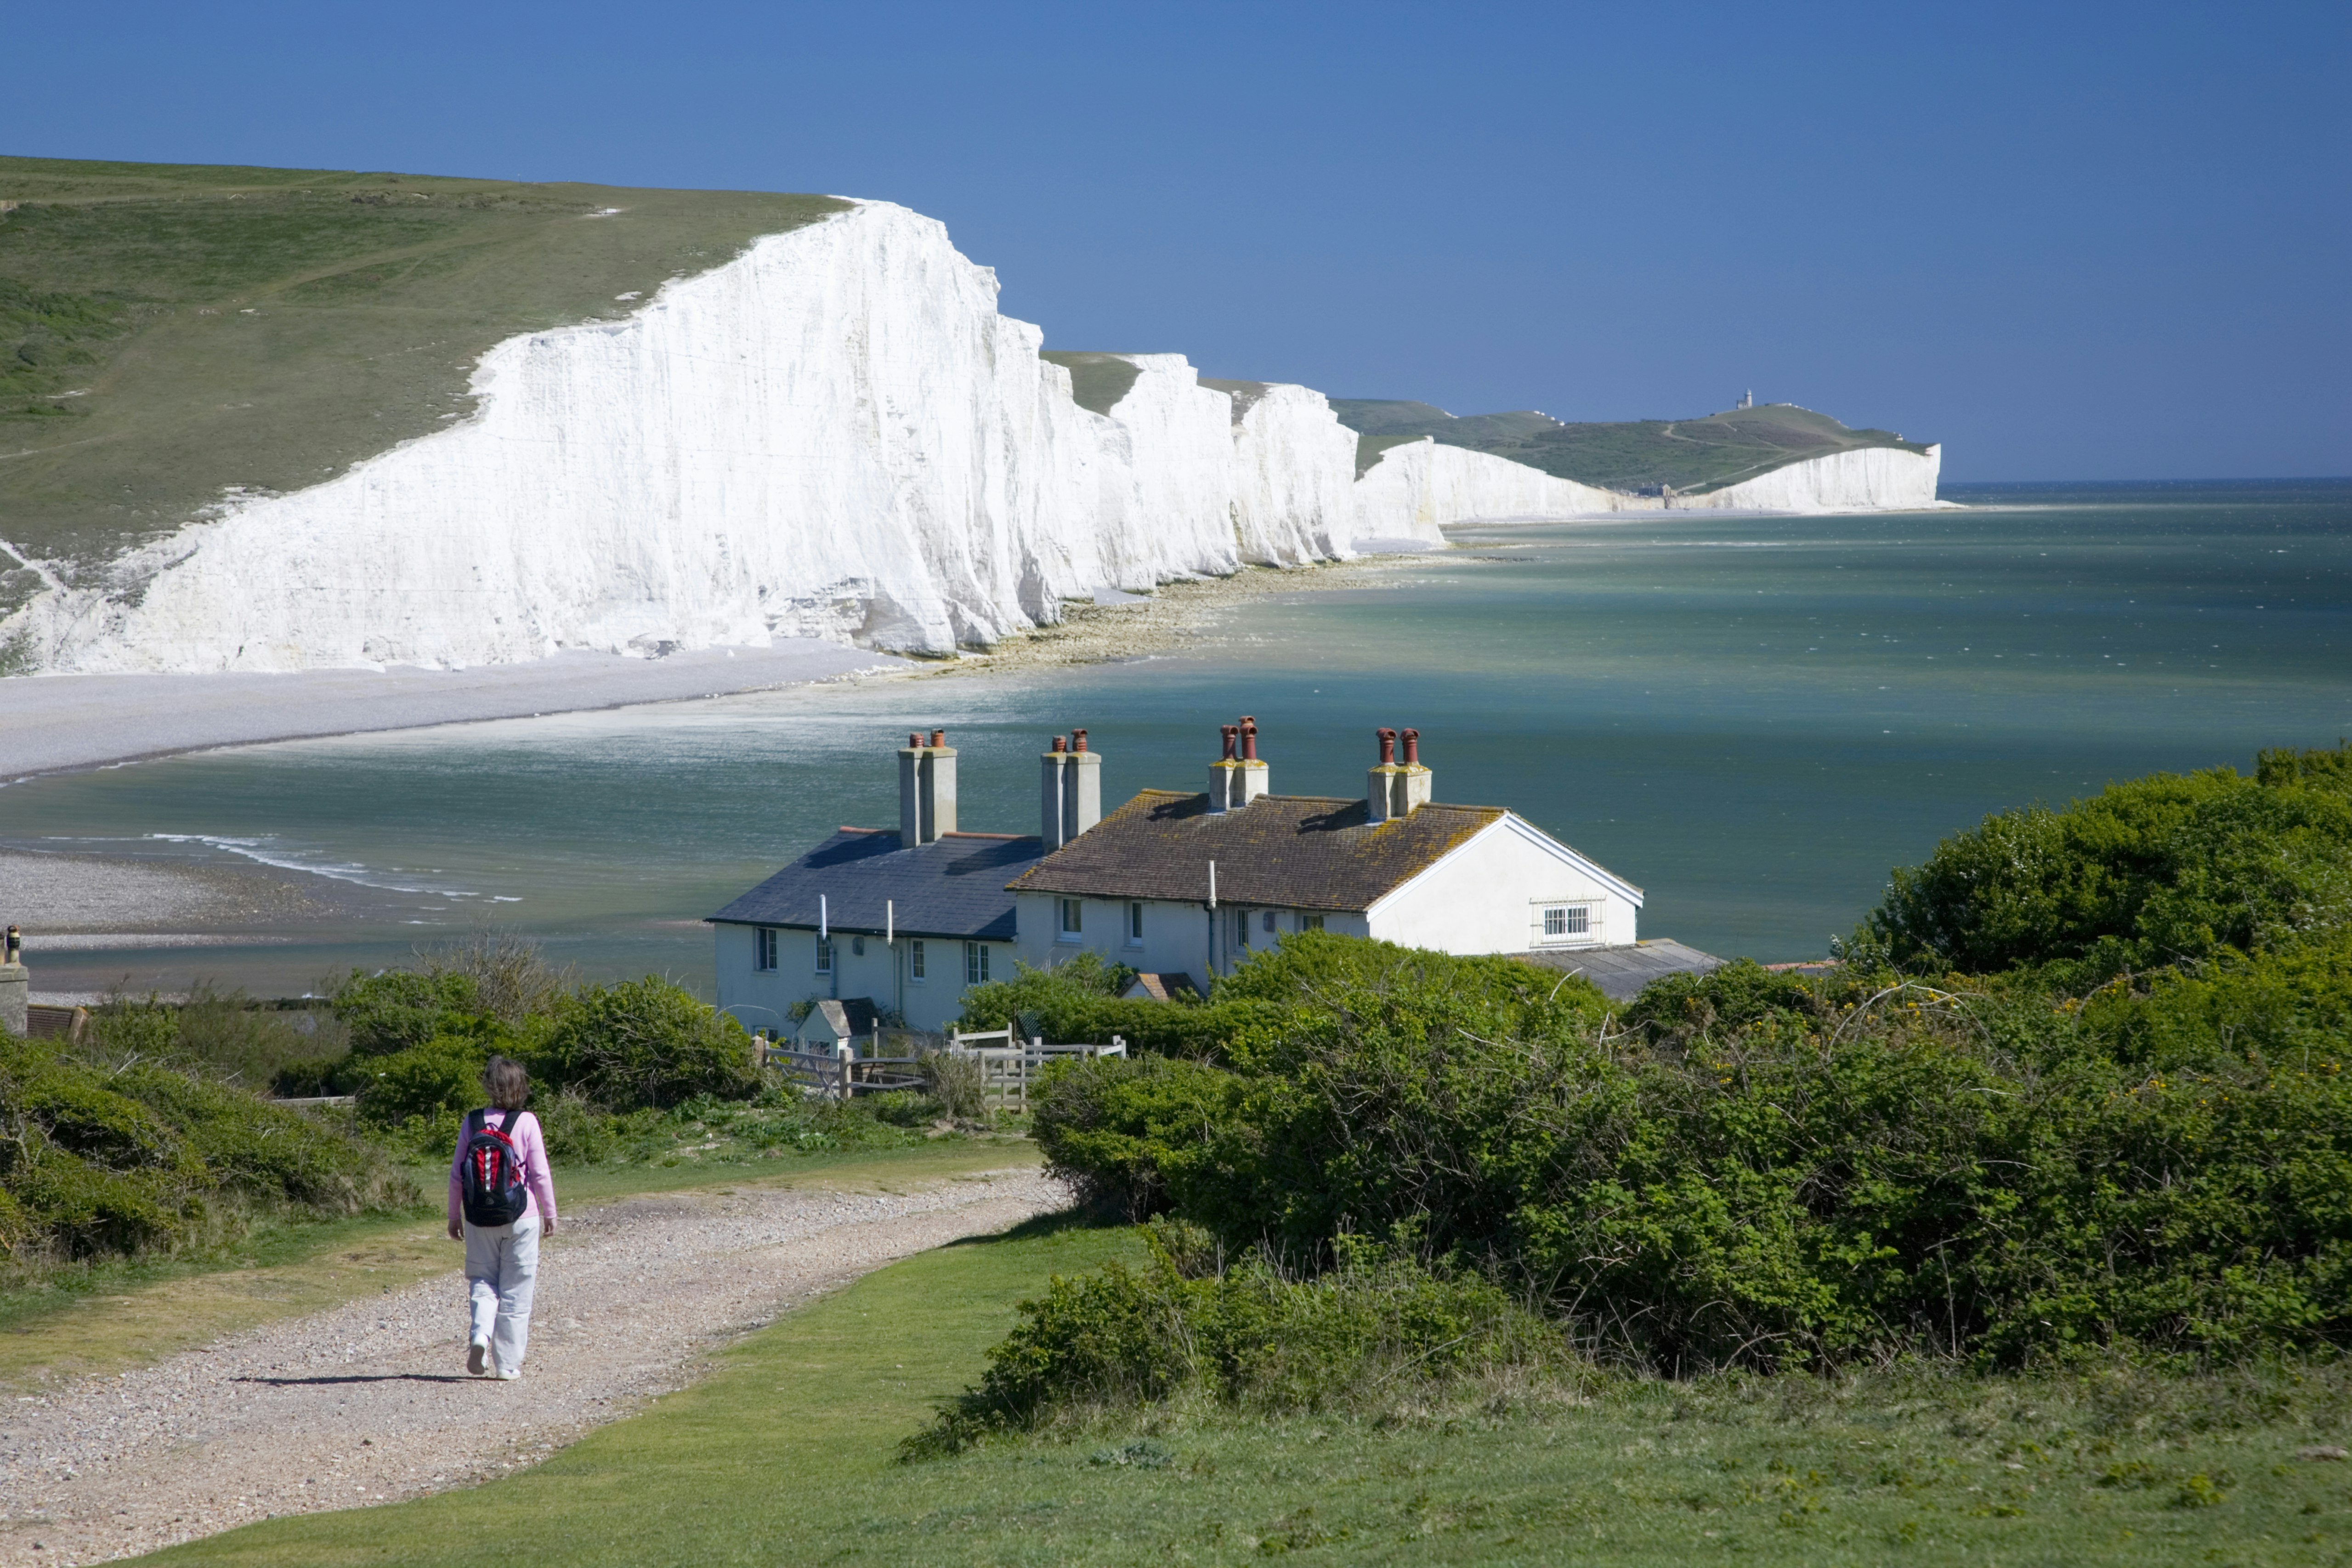 Person walking towards a small row of white cottages on a cliff. The white cliffs of Seven Sisters stretch out into the distance.